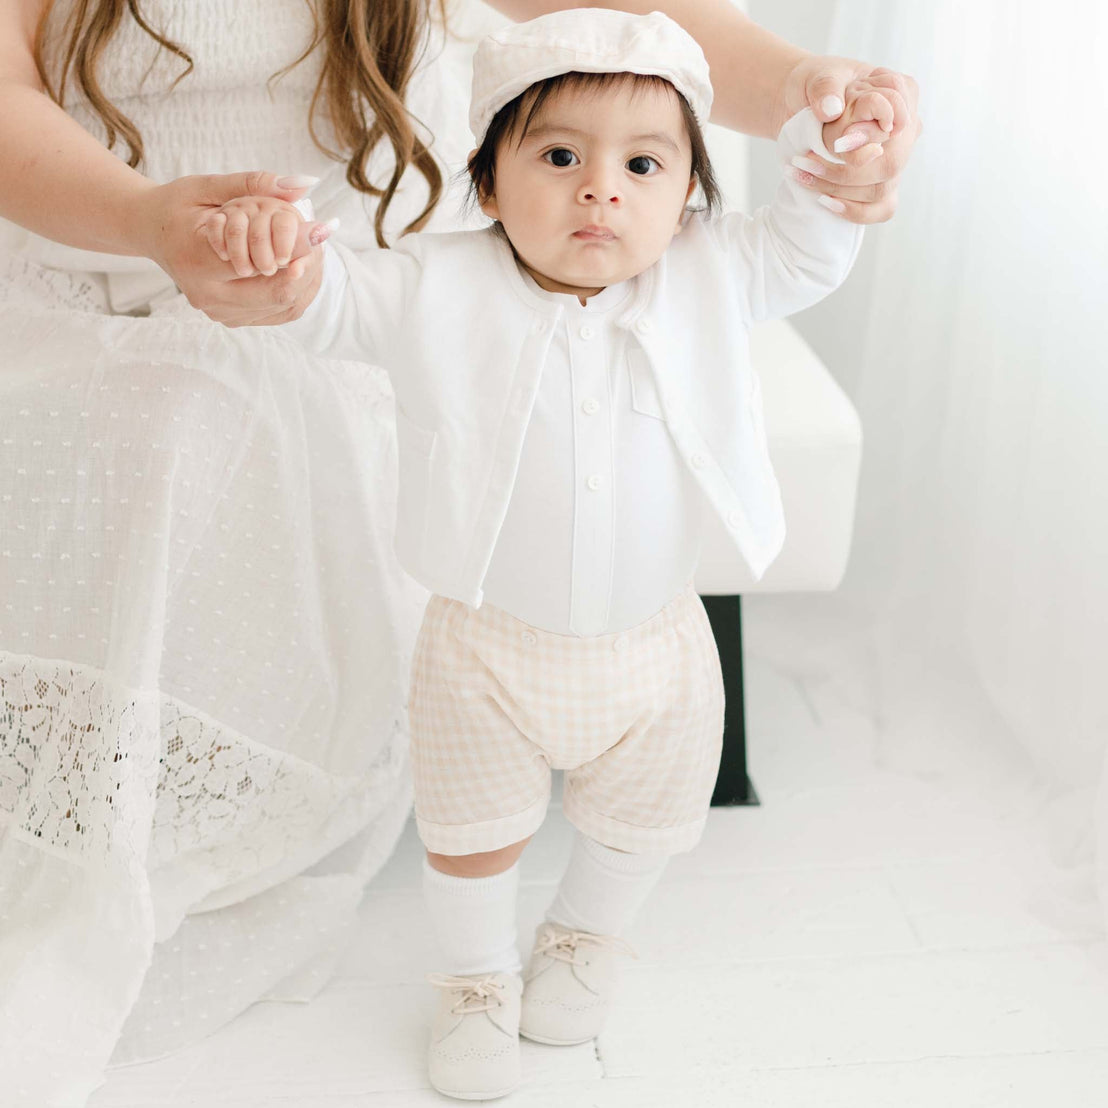 A baby wearing an Ian Fawn Shorts Set with traditional plaid shorts and a cute bonnet stands supported by a seated woman in a white dress, only her arms visible, in a bright room.